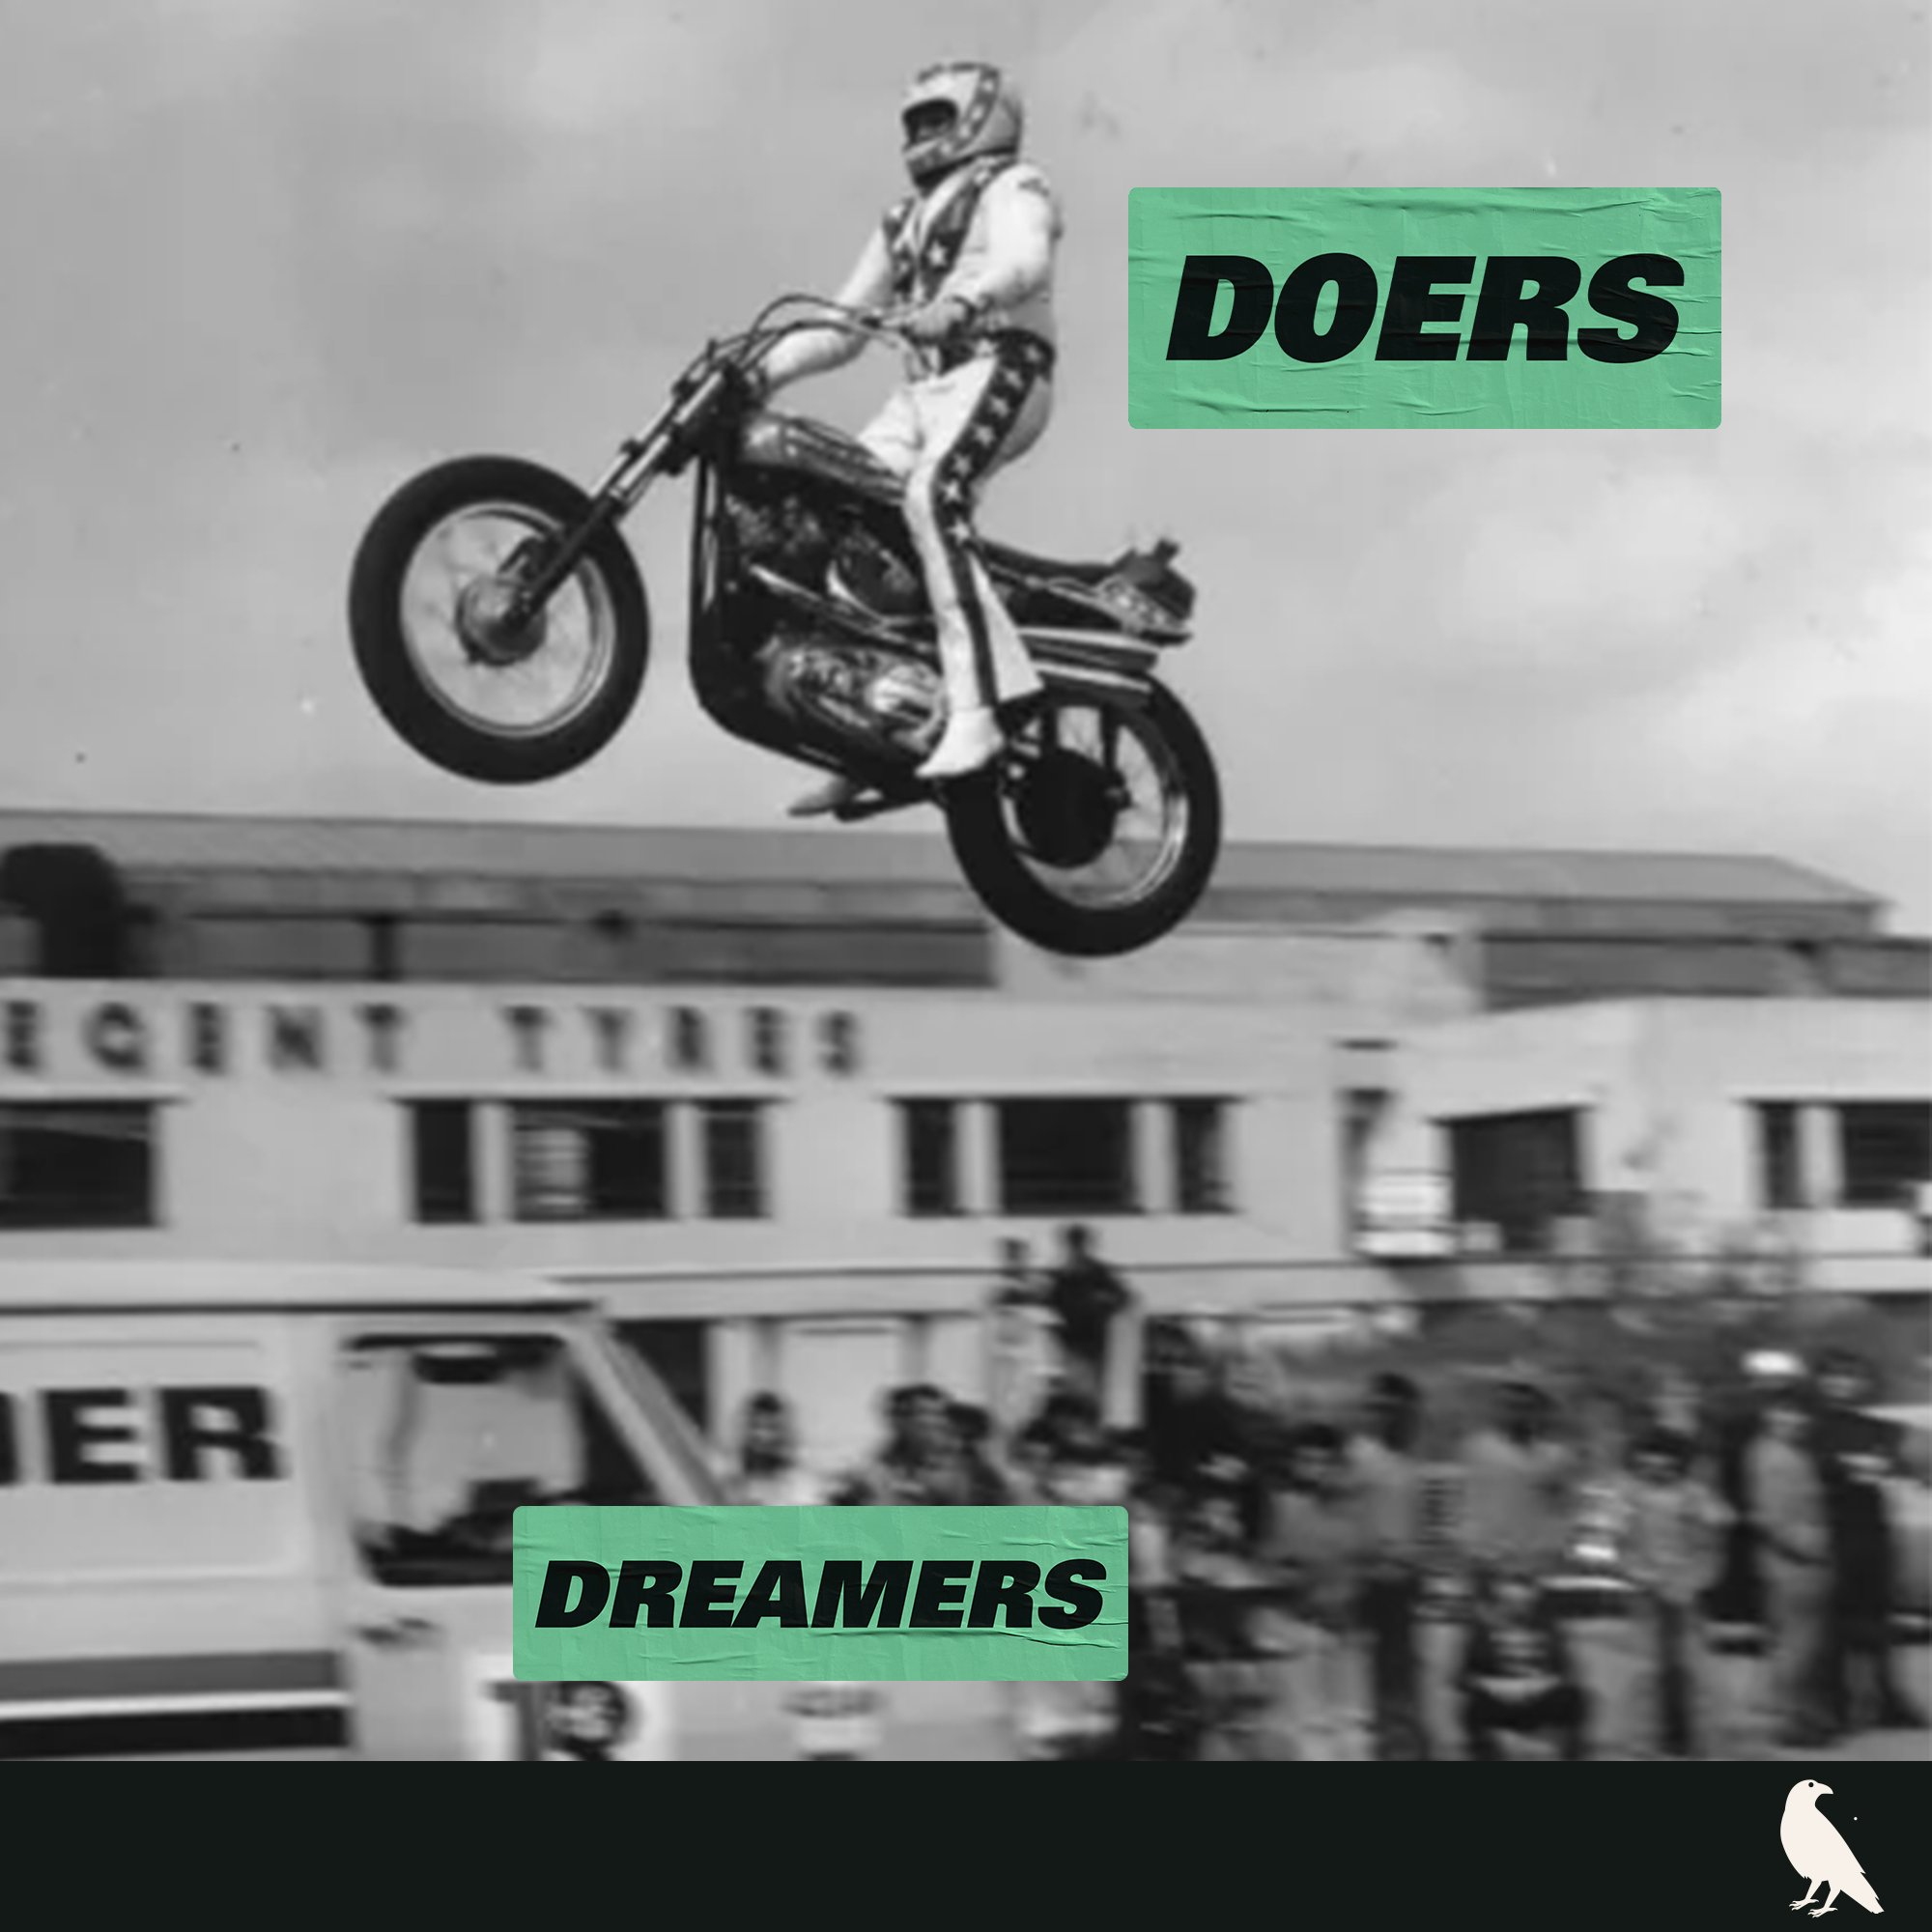 You&rsquo;re either reaching for the sky or reaching for your camera. Which one are you?

#DOersvsDreamers